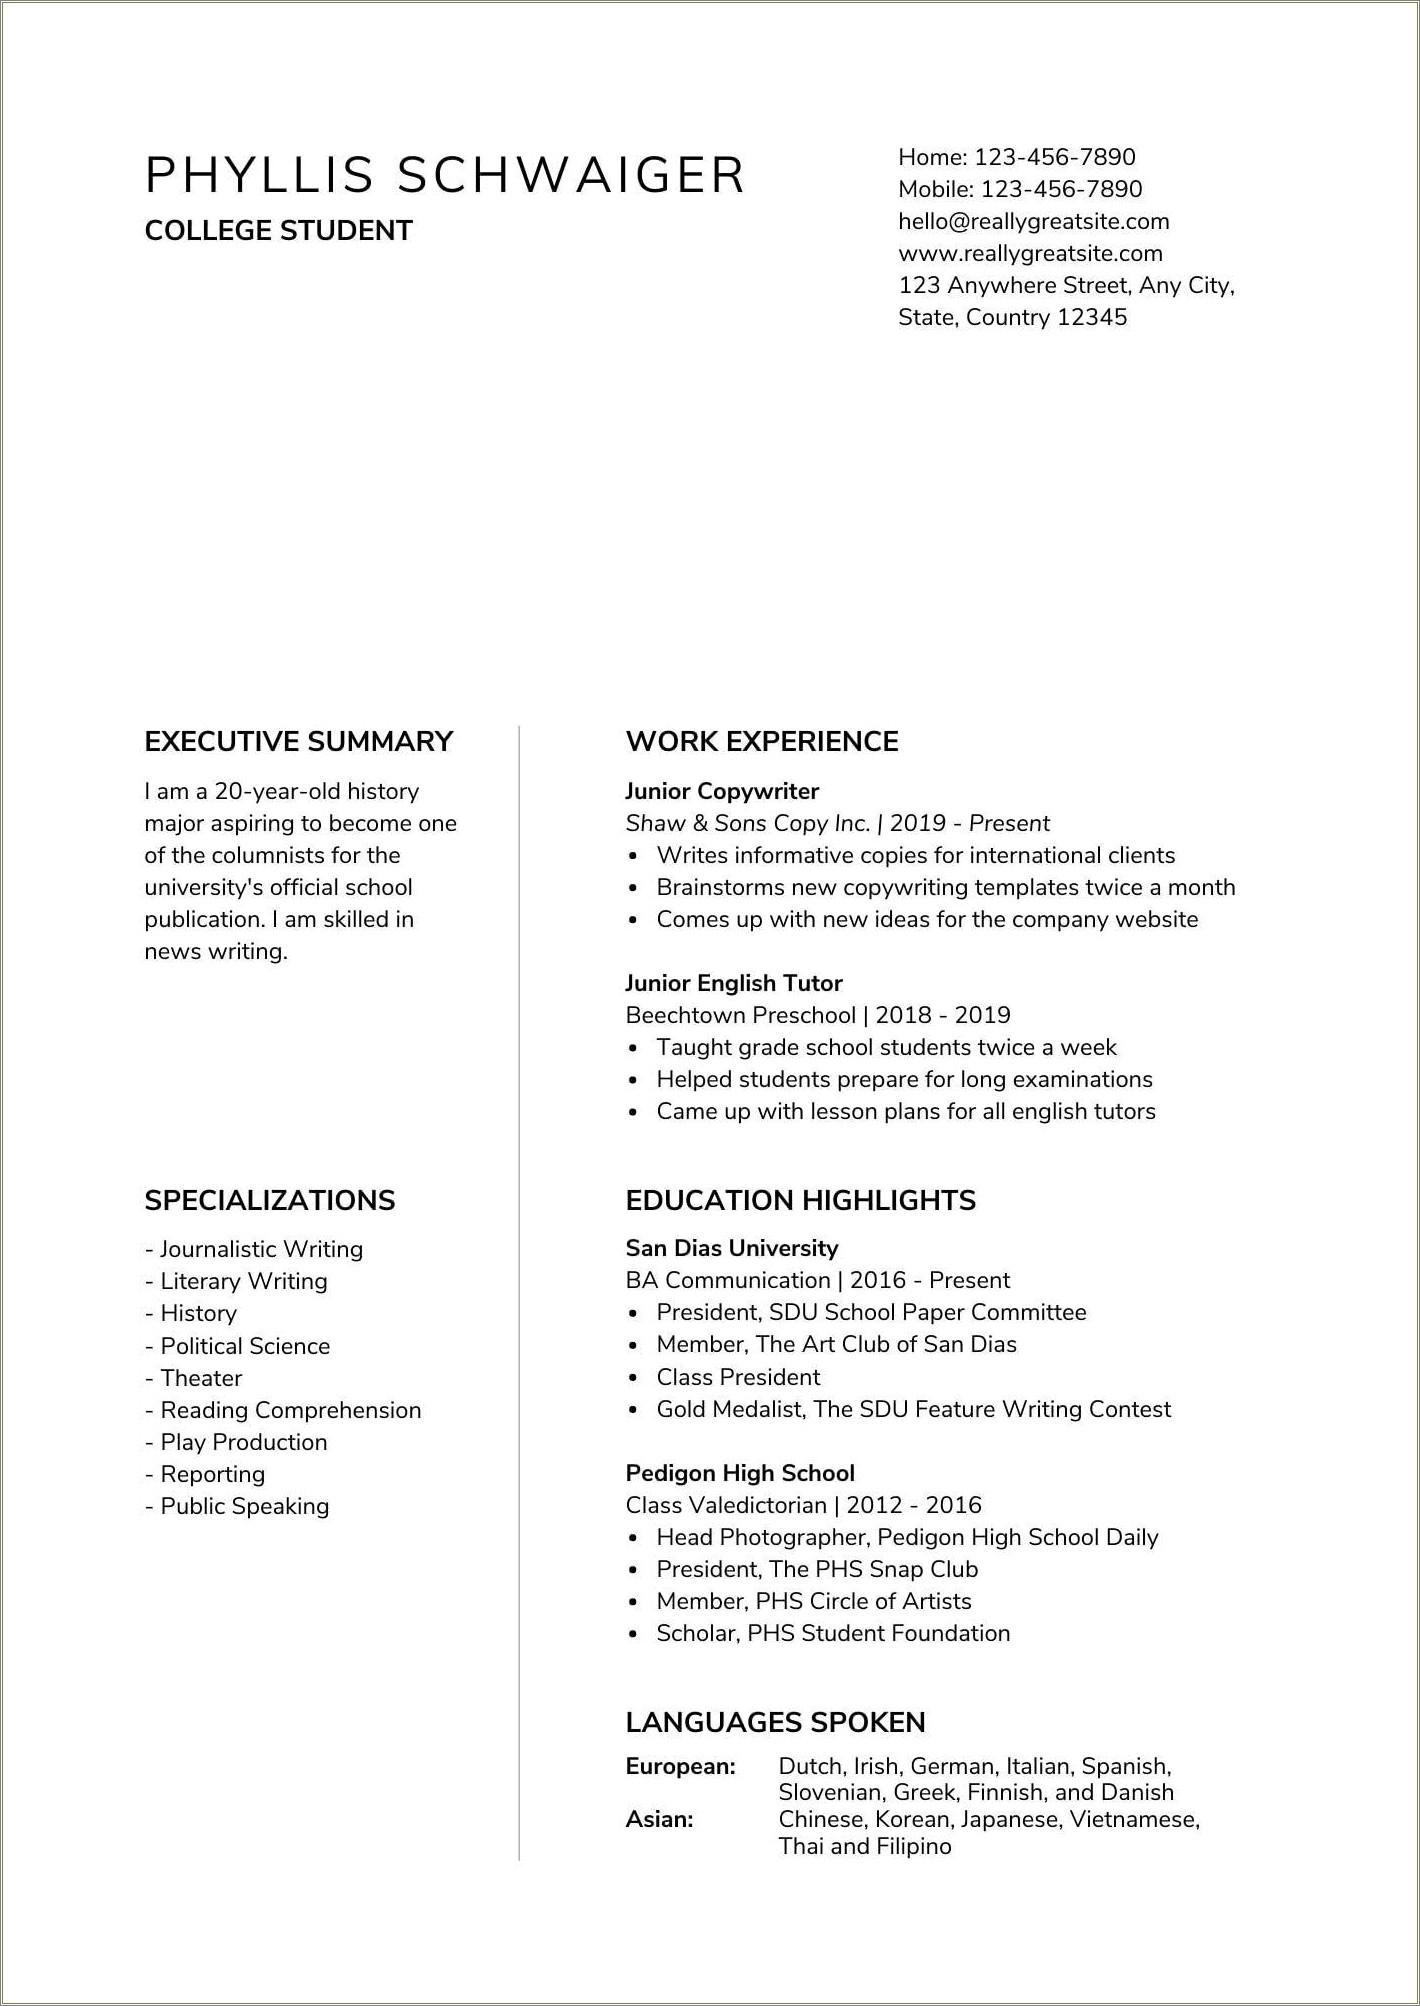 Resume For First New Job In 7 Years